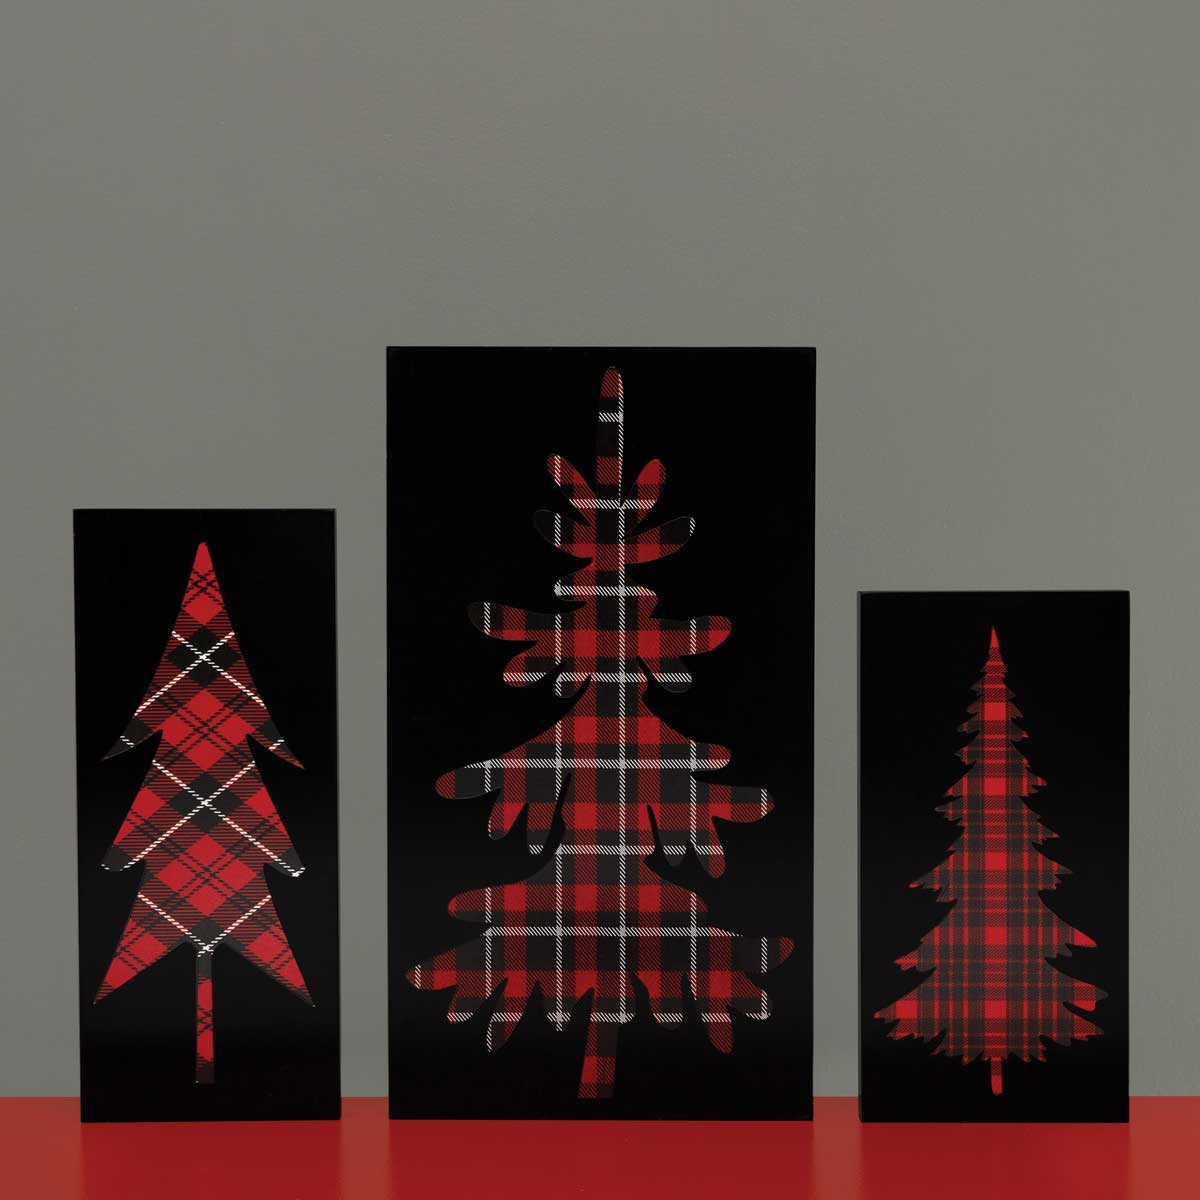 BLOCK PLAID TREE LARGE 8.25IN X 1IN X 15IN - Click Image to Close